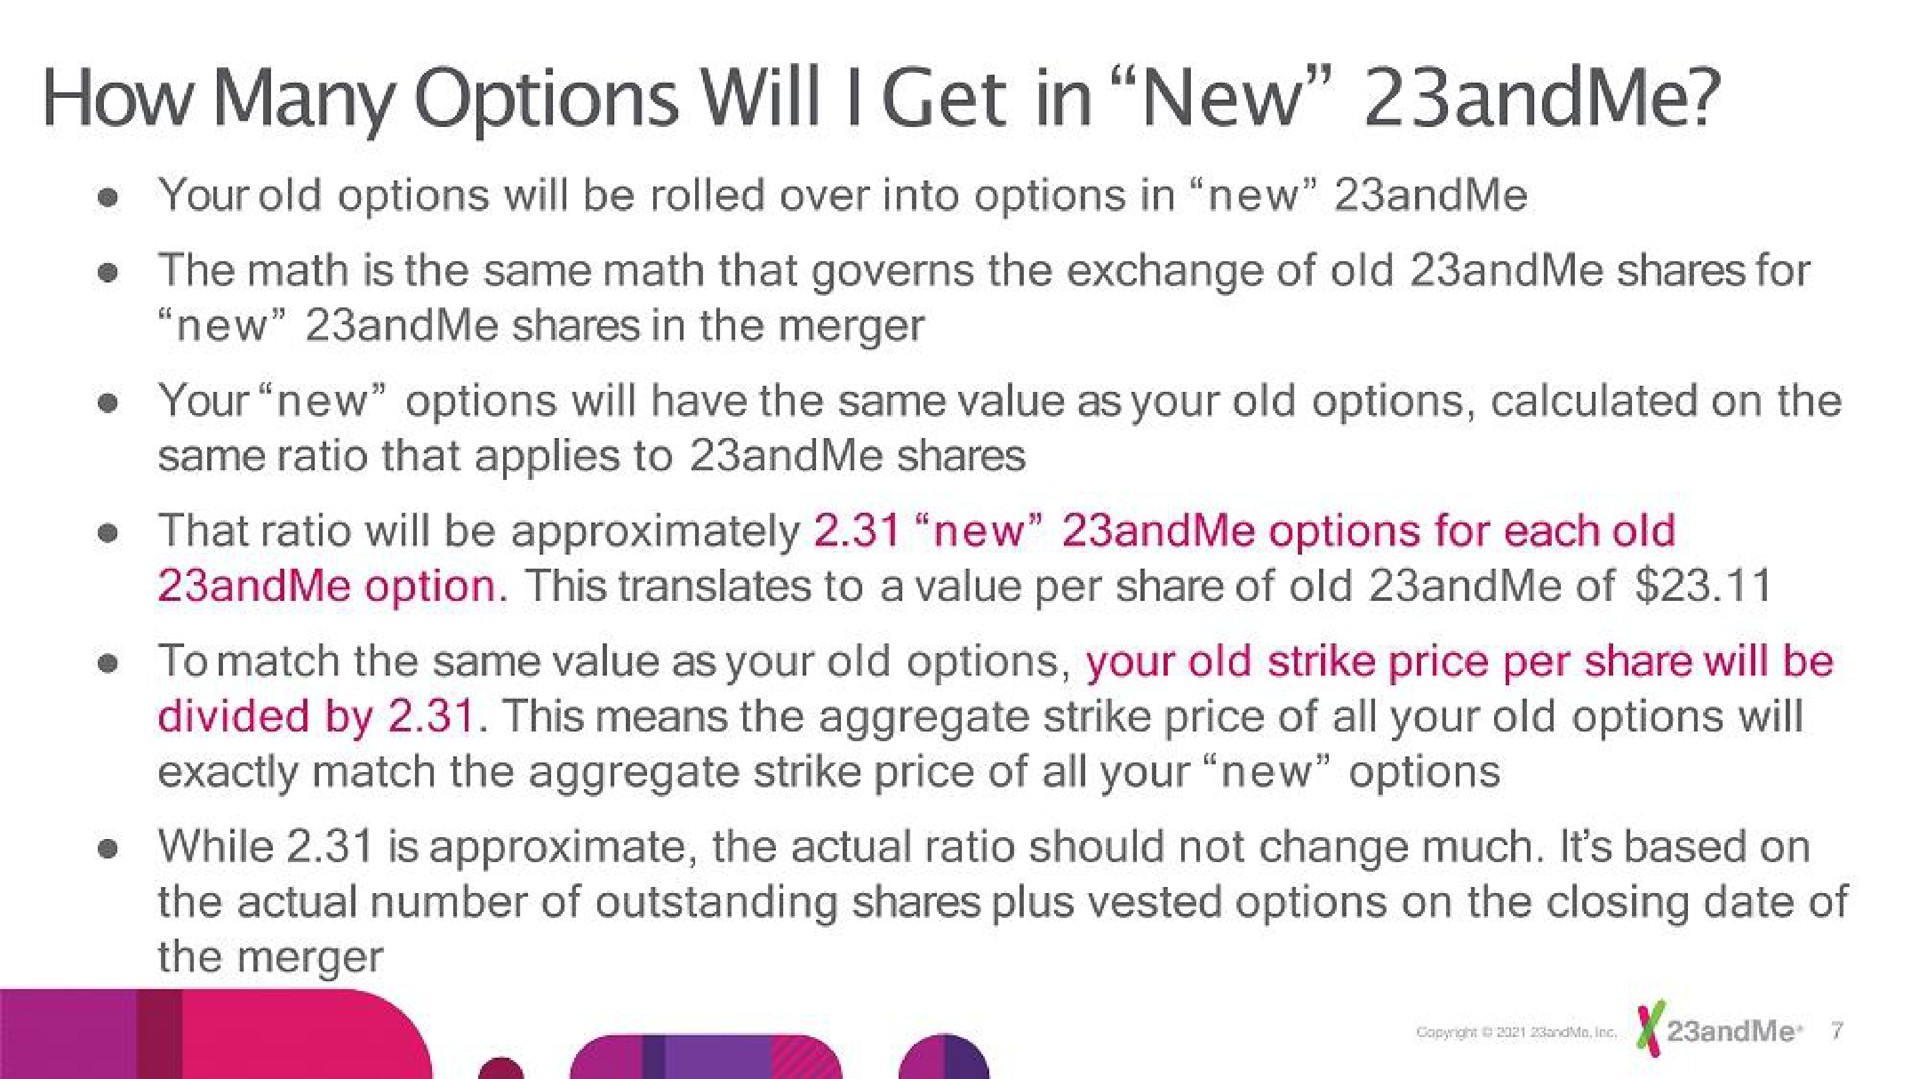 how many options will get in new | 23andMe